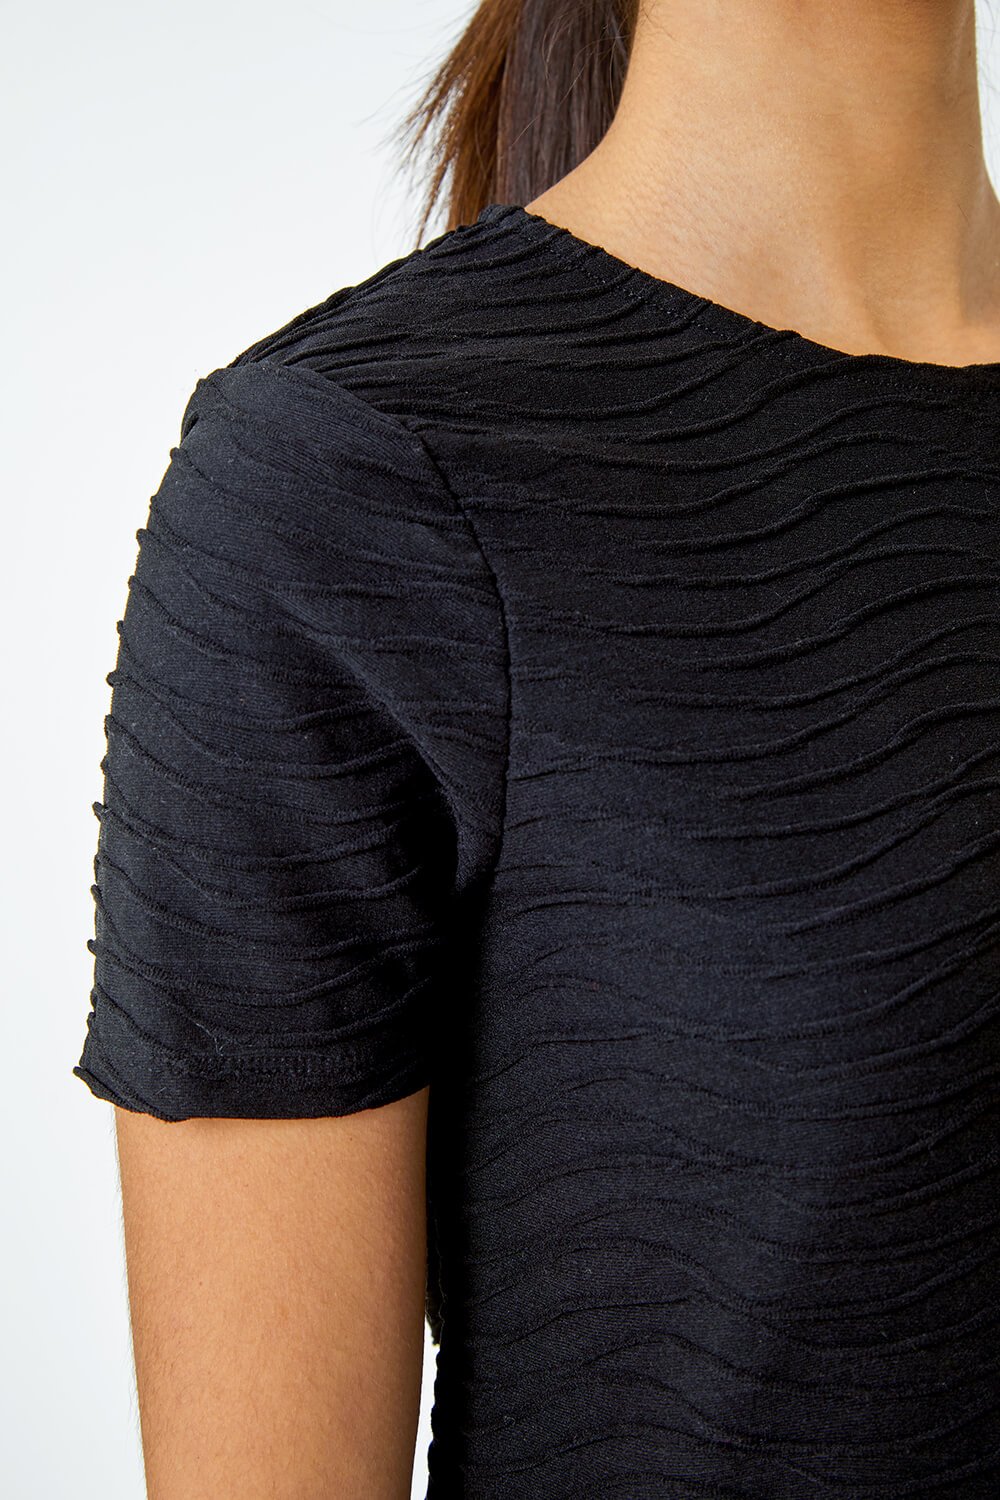 Black Textured A-Line Stretch Dress, Image 5 of 5